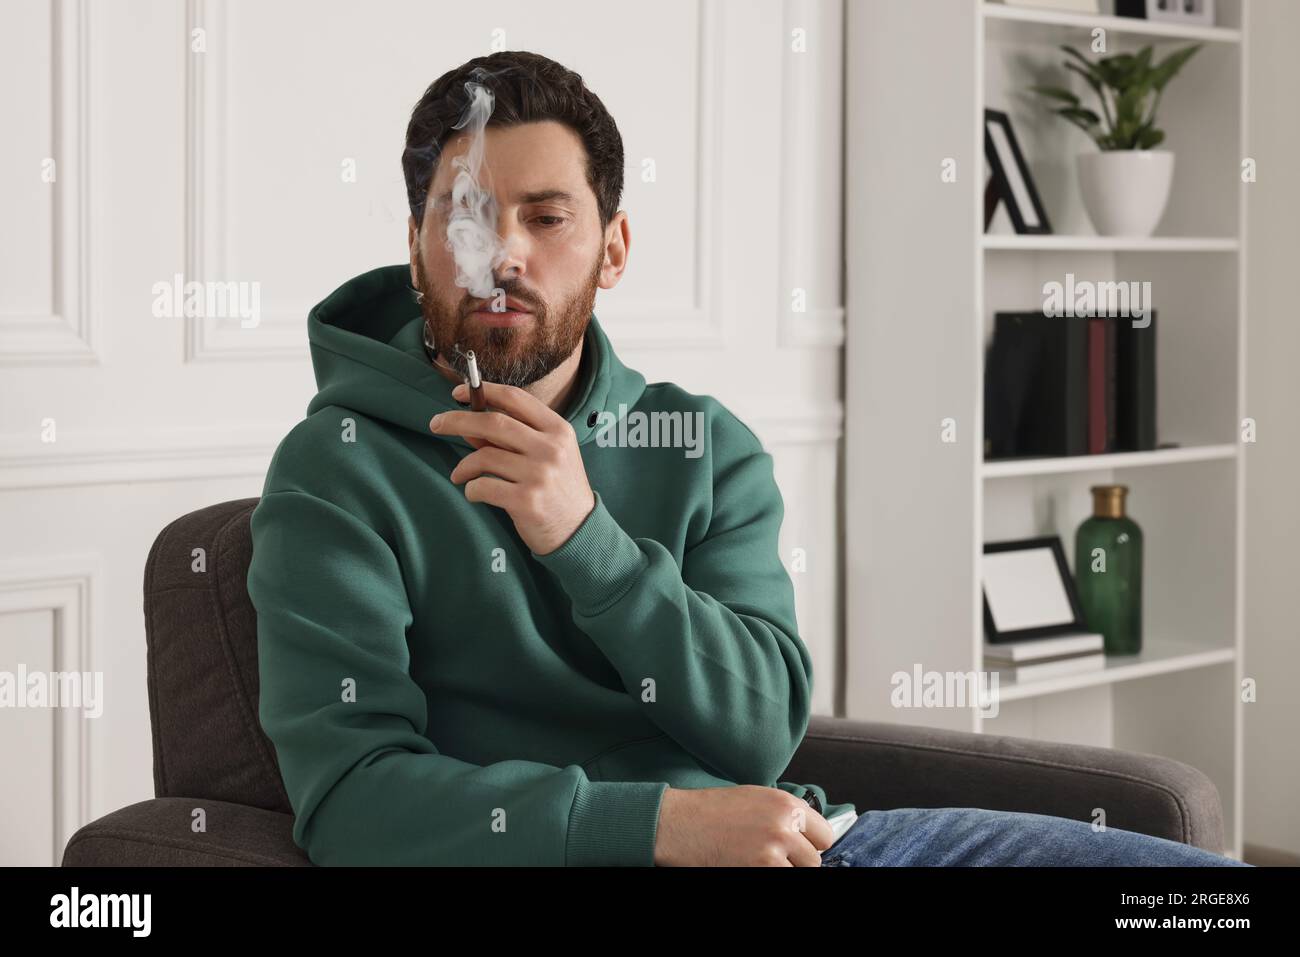 Man using cigarette holder for smoking indoors Stock Photo